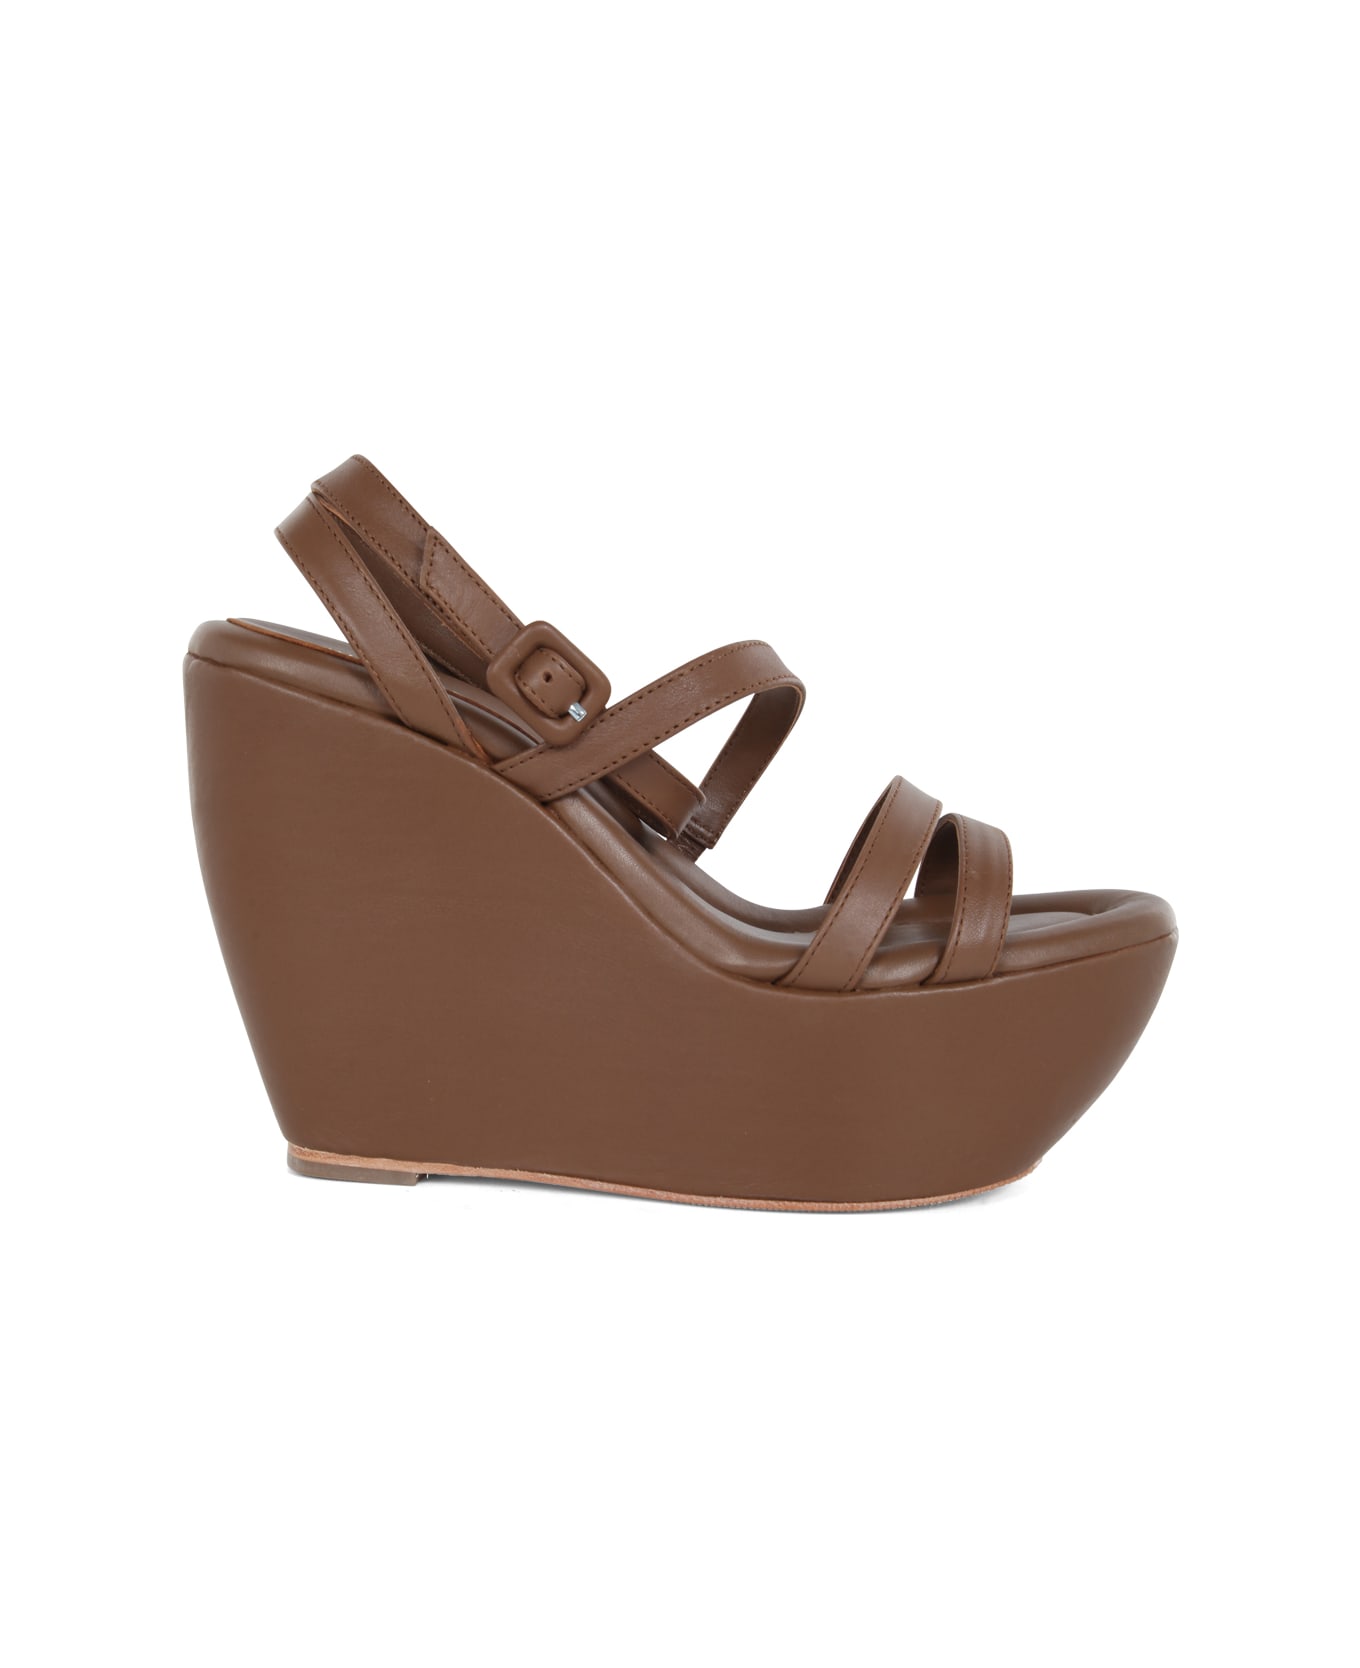 Paloma Barceló Iraide Wedge Sandals With Ankle Bands - Hazelnut